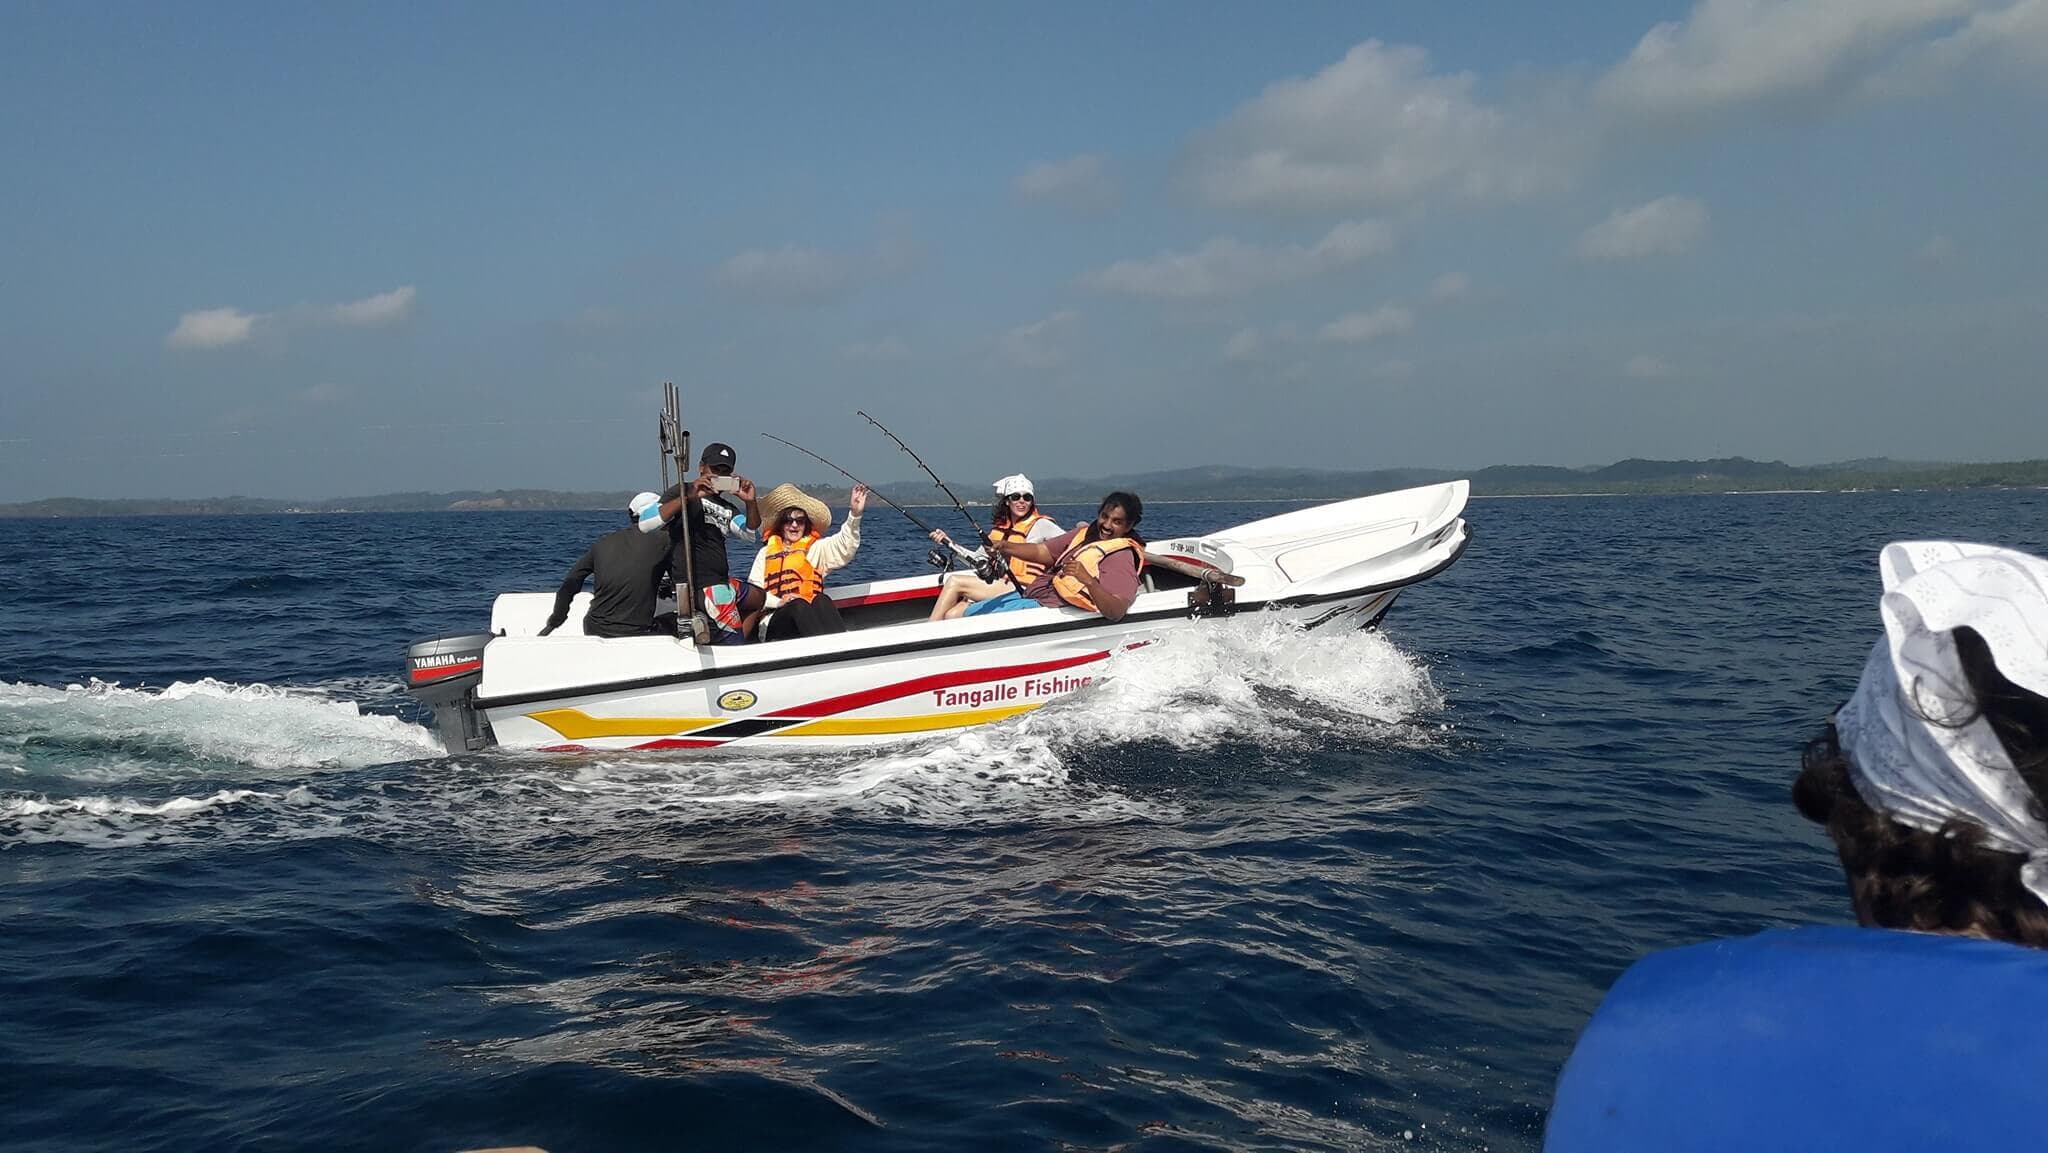 Tourists tour with a fishing boat to catch fishes in Tangalle sea